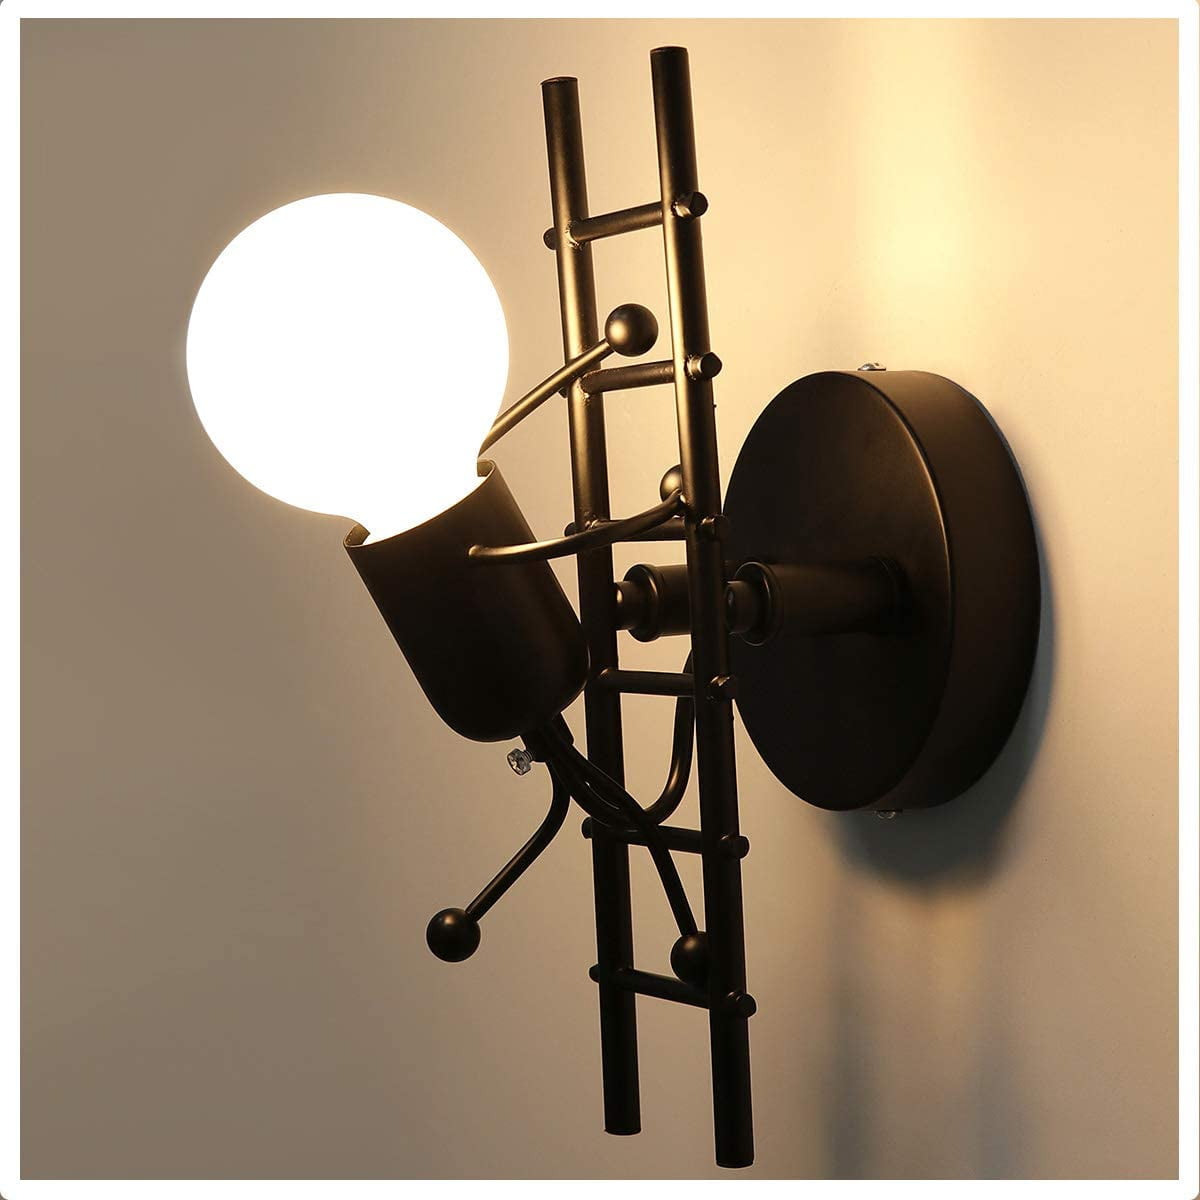 HAWEE Humanoid Creative Wall Light Indoor Wall Lamp Modern Wall Sconce Light Art Deco Iron E27 Base for Bedroom Hallway White Restaurant Kitchen Children Room Stair